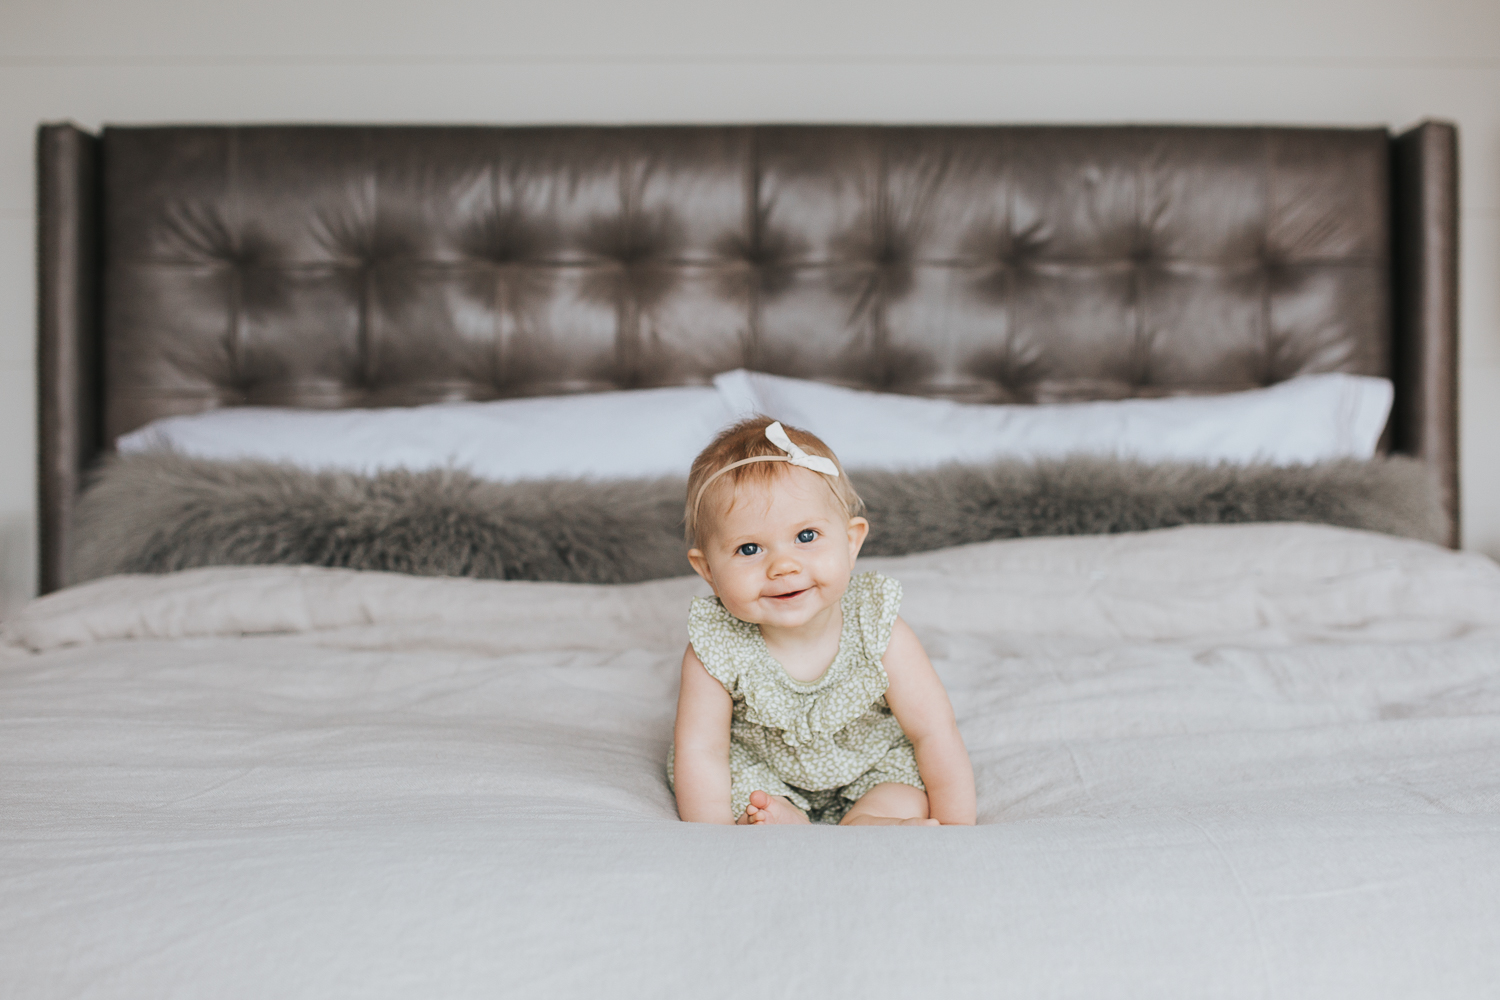 6 month old baby girl with blonde hair and blue eyes sitting on bed smiling at camera - Barrie In-home Family Photography